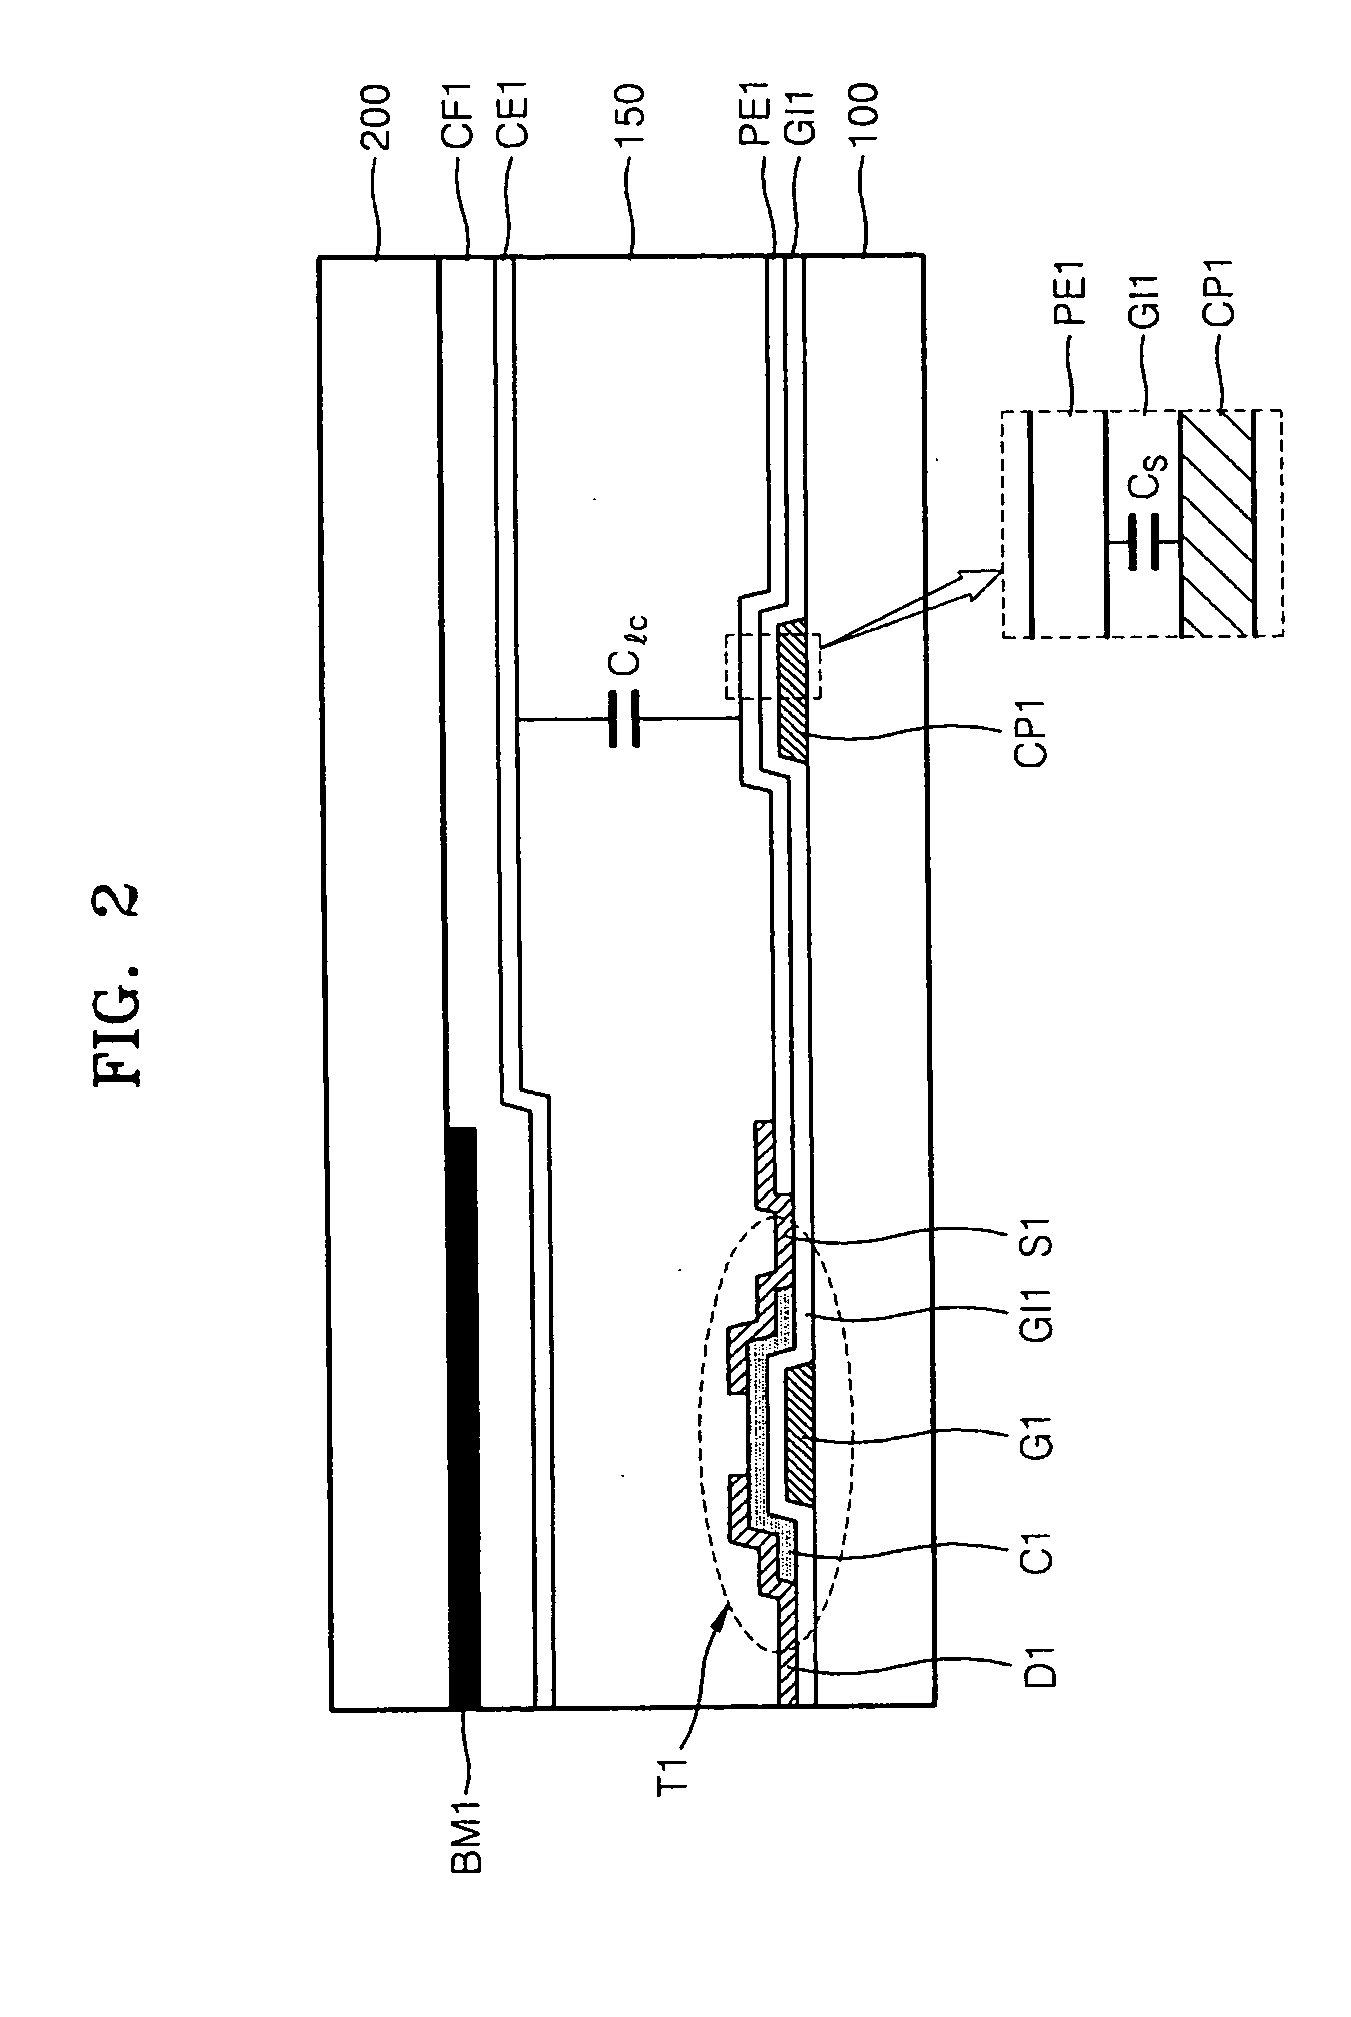 Display apparatuses and methods of operating the same